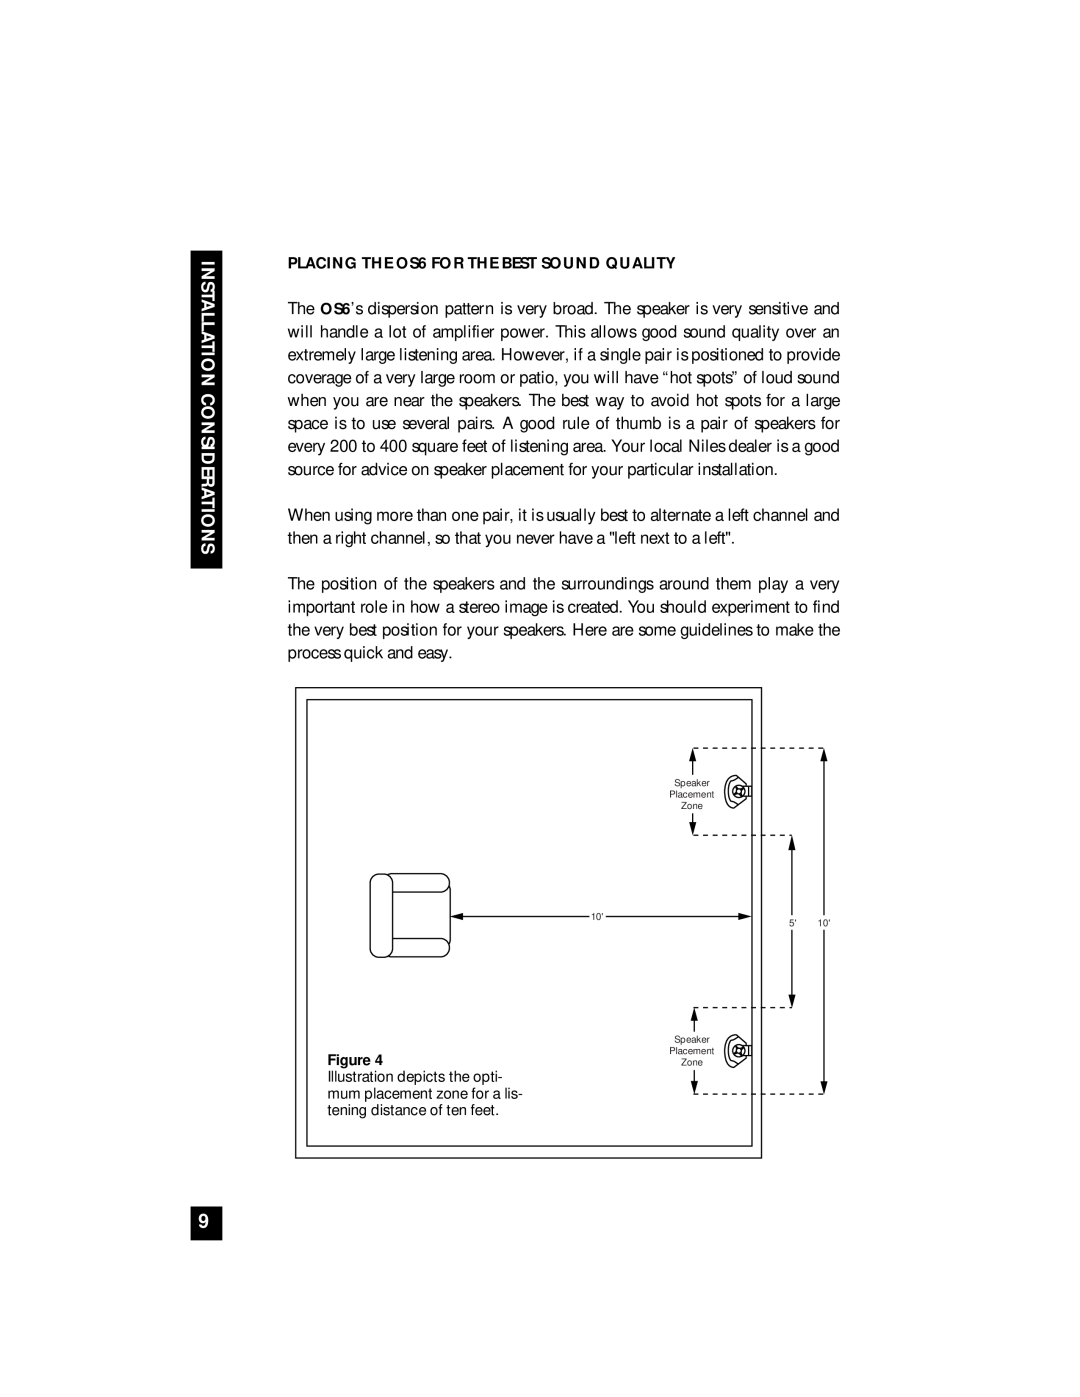 Niles Audio manual PLACING THE OS6 FOR THE BEST SOUND QUALITY, Installation Considerations 